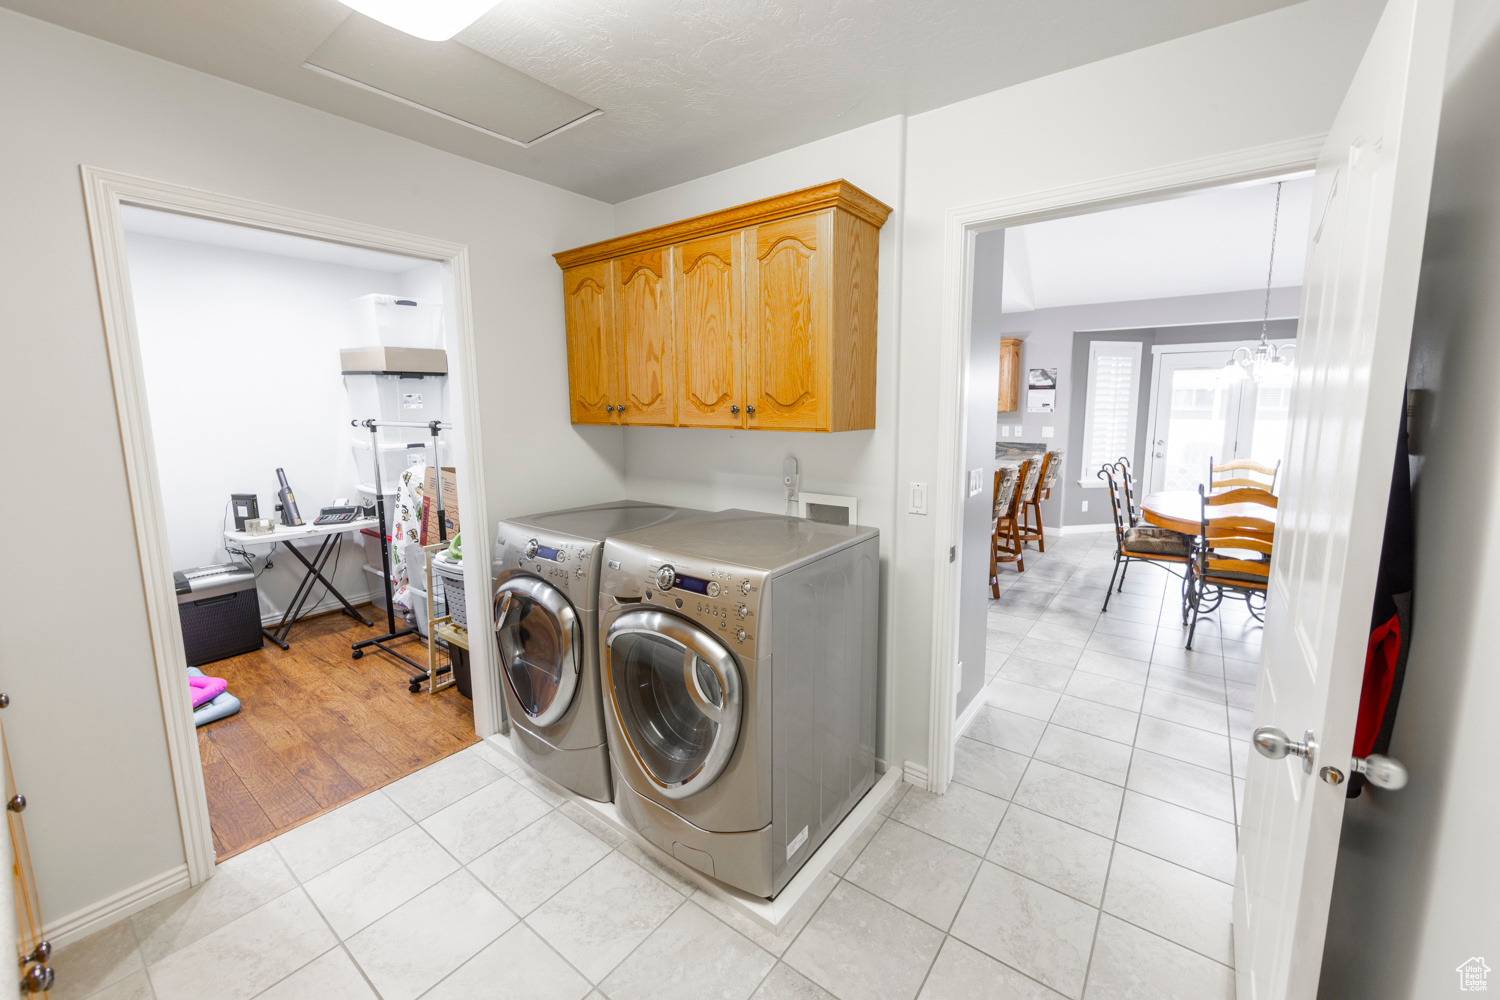 Laundry area with cabinets, hookup for a washing machine, light tile flooring, and washer and clothes dryer (included).  Bonus Room can be an office or an extra Pantry